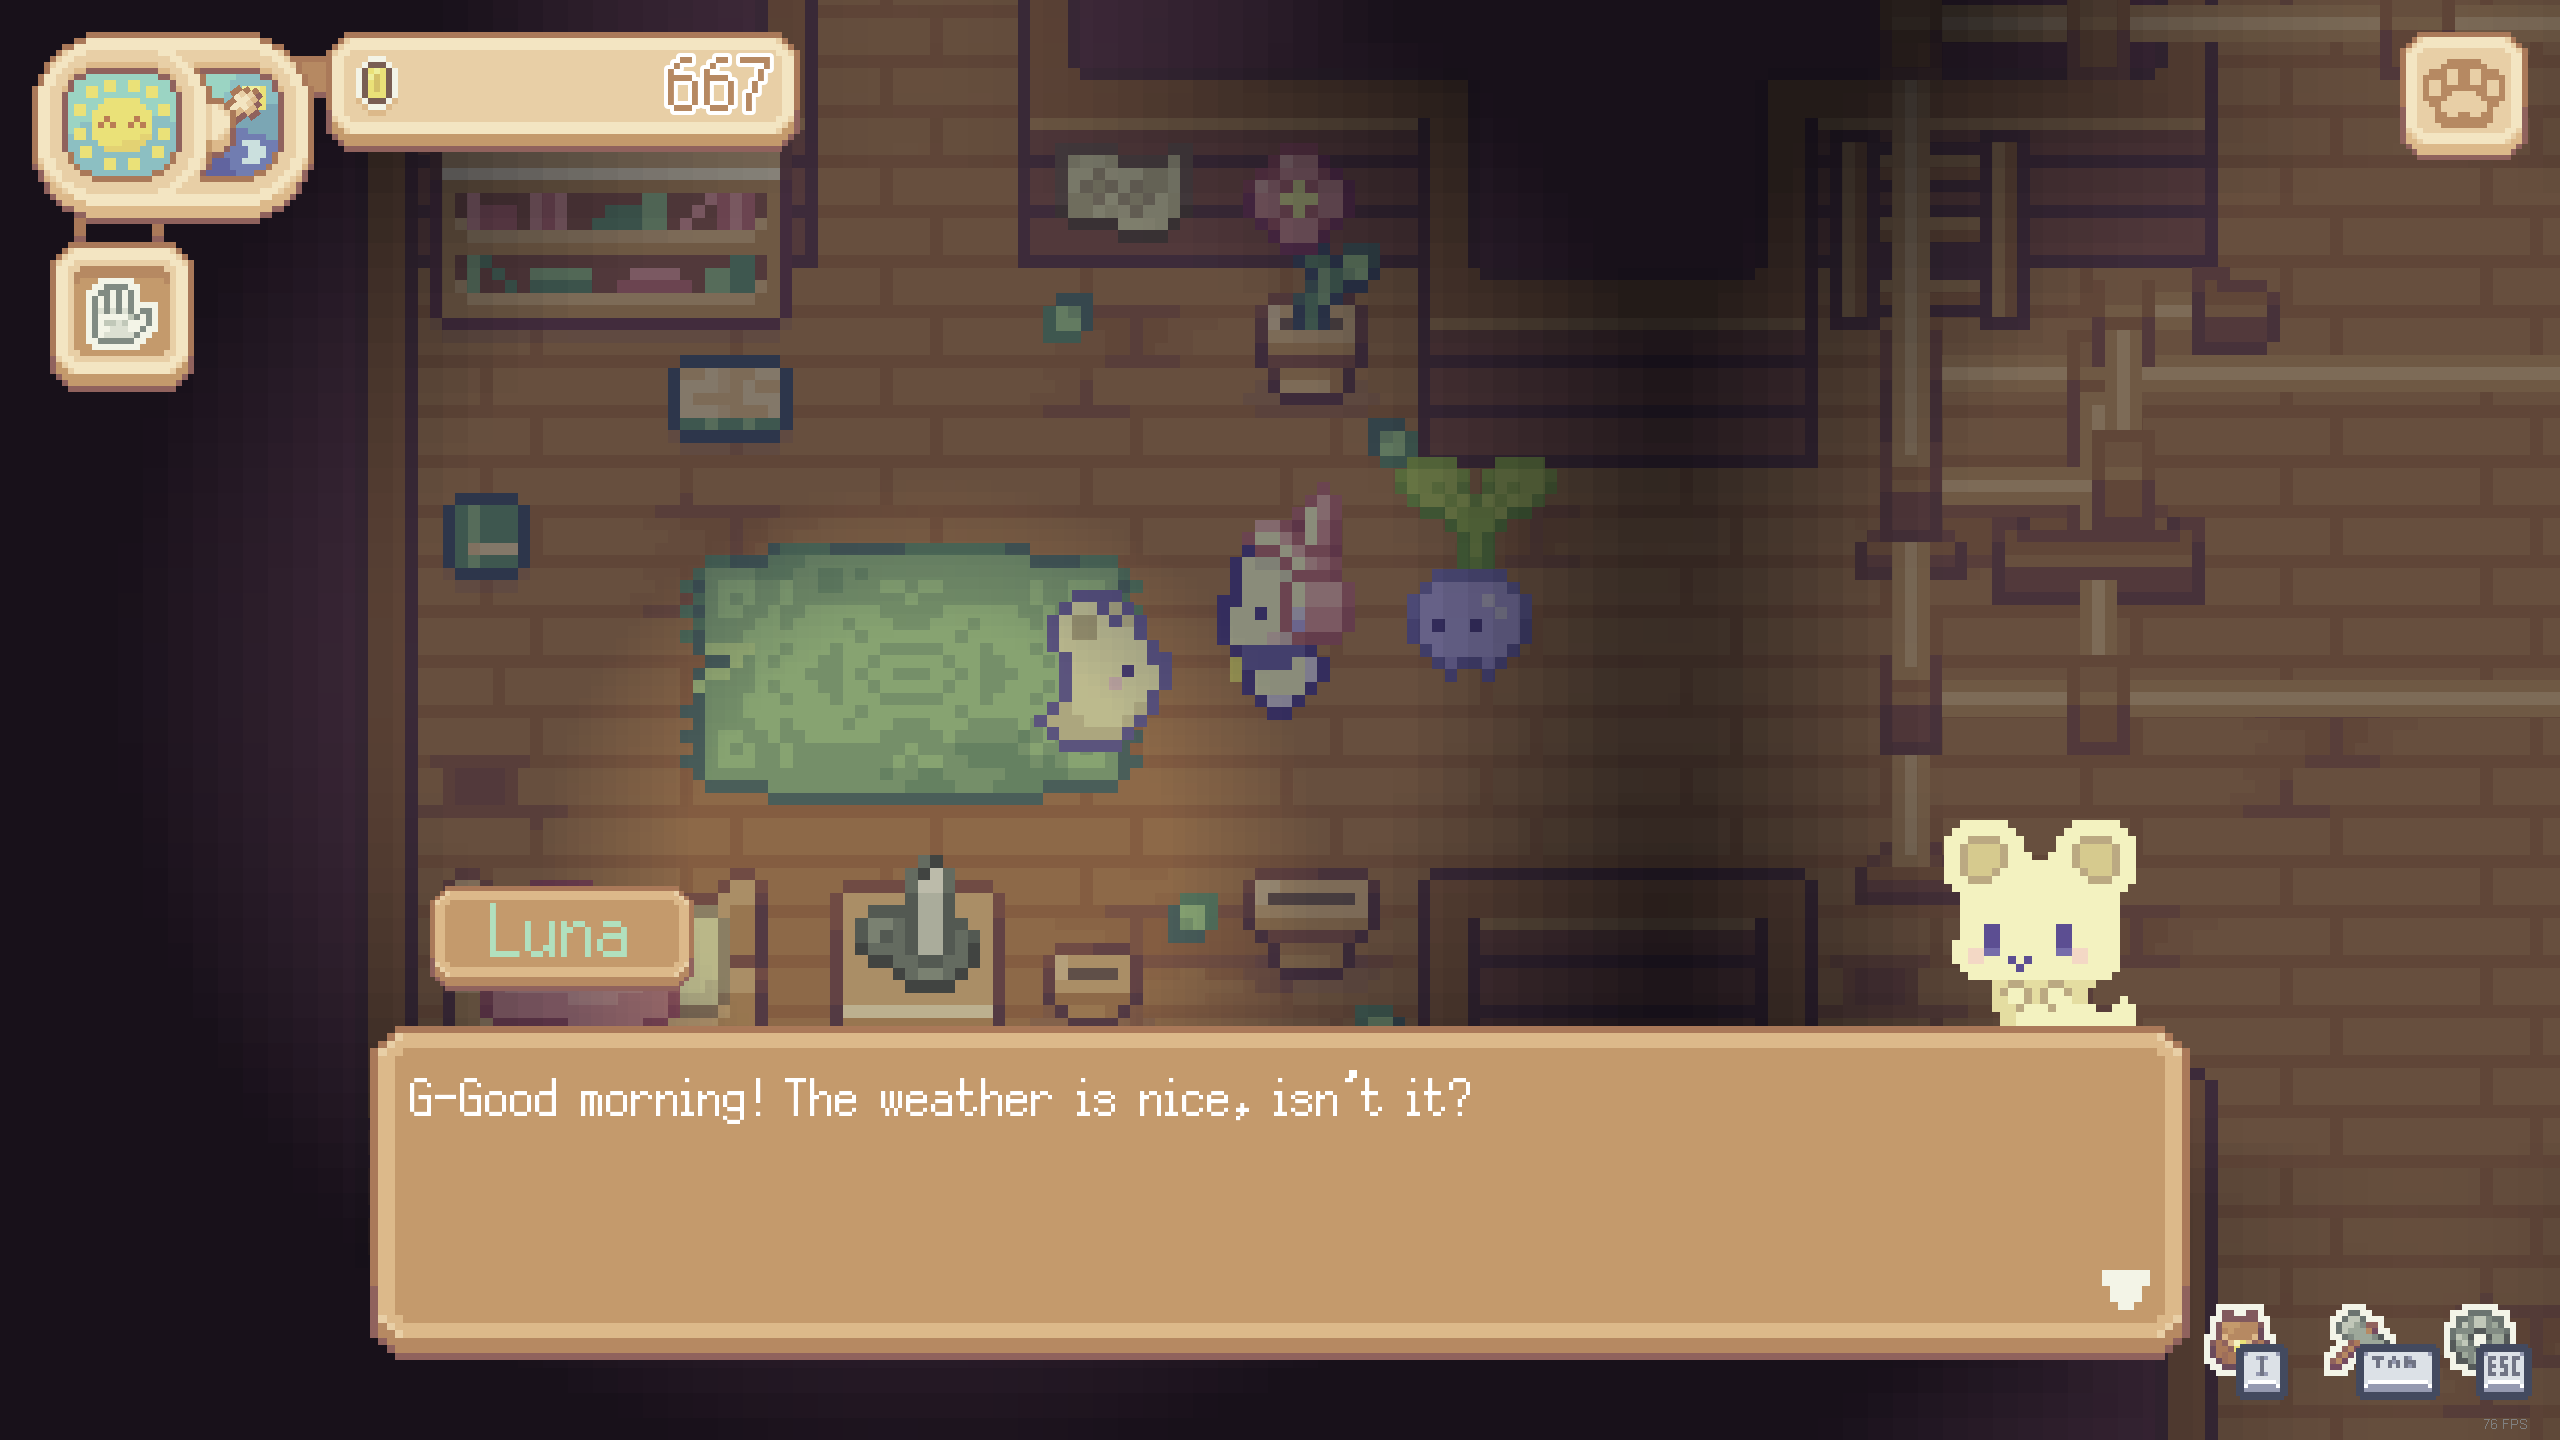 showing some early-game dialogue from Luna which says "G-Good morning! The weather is nice, isn't it?